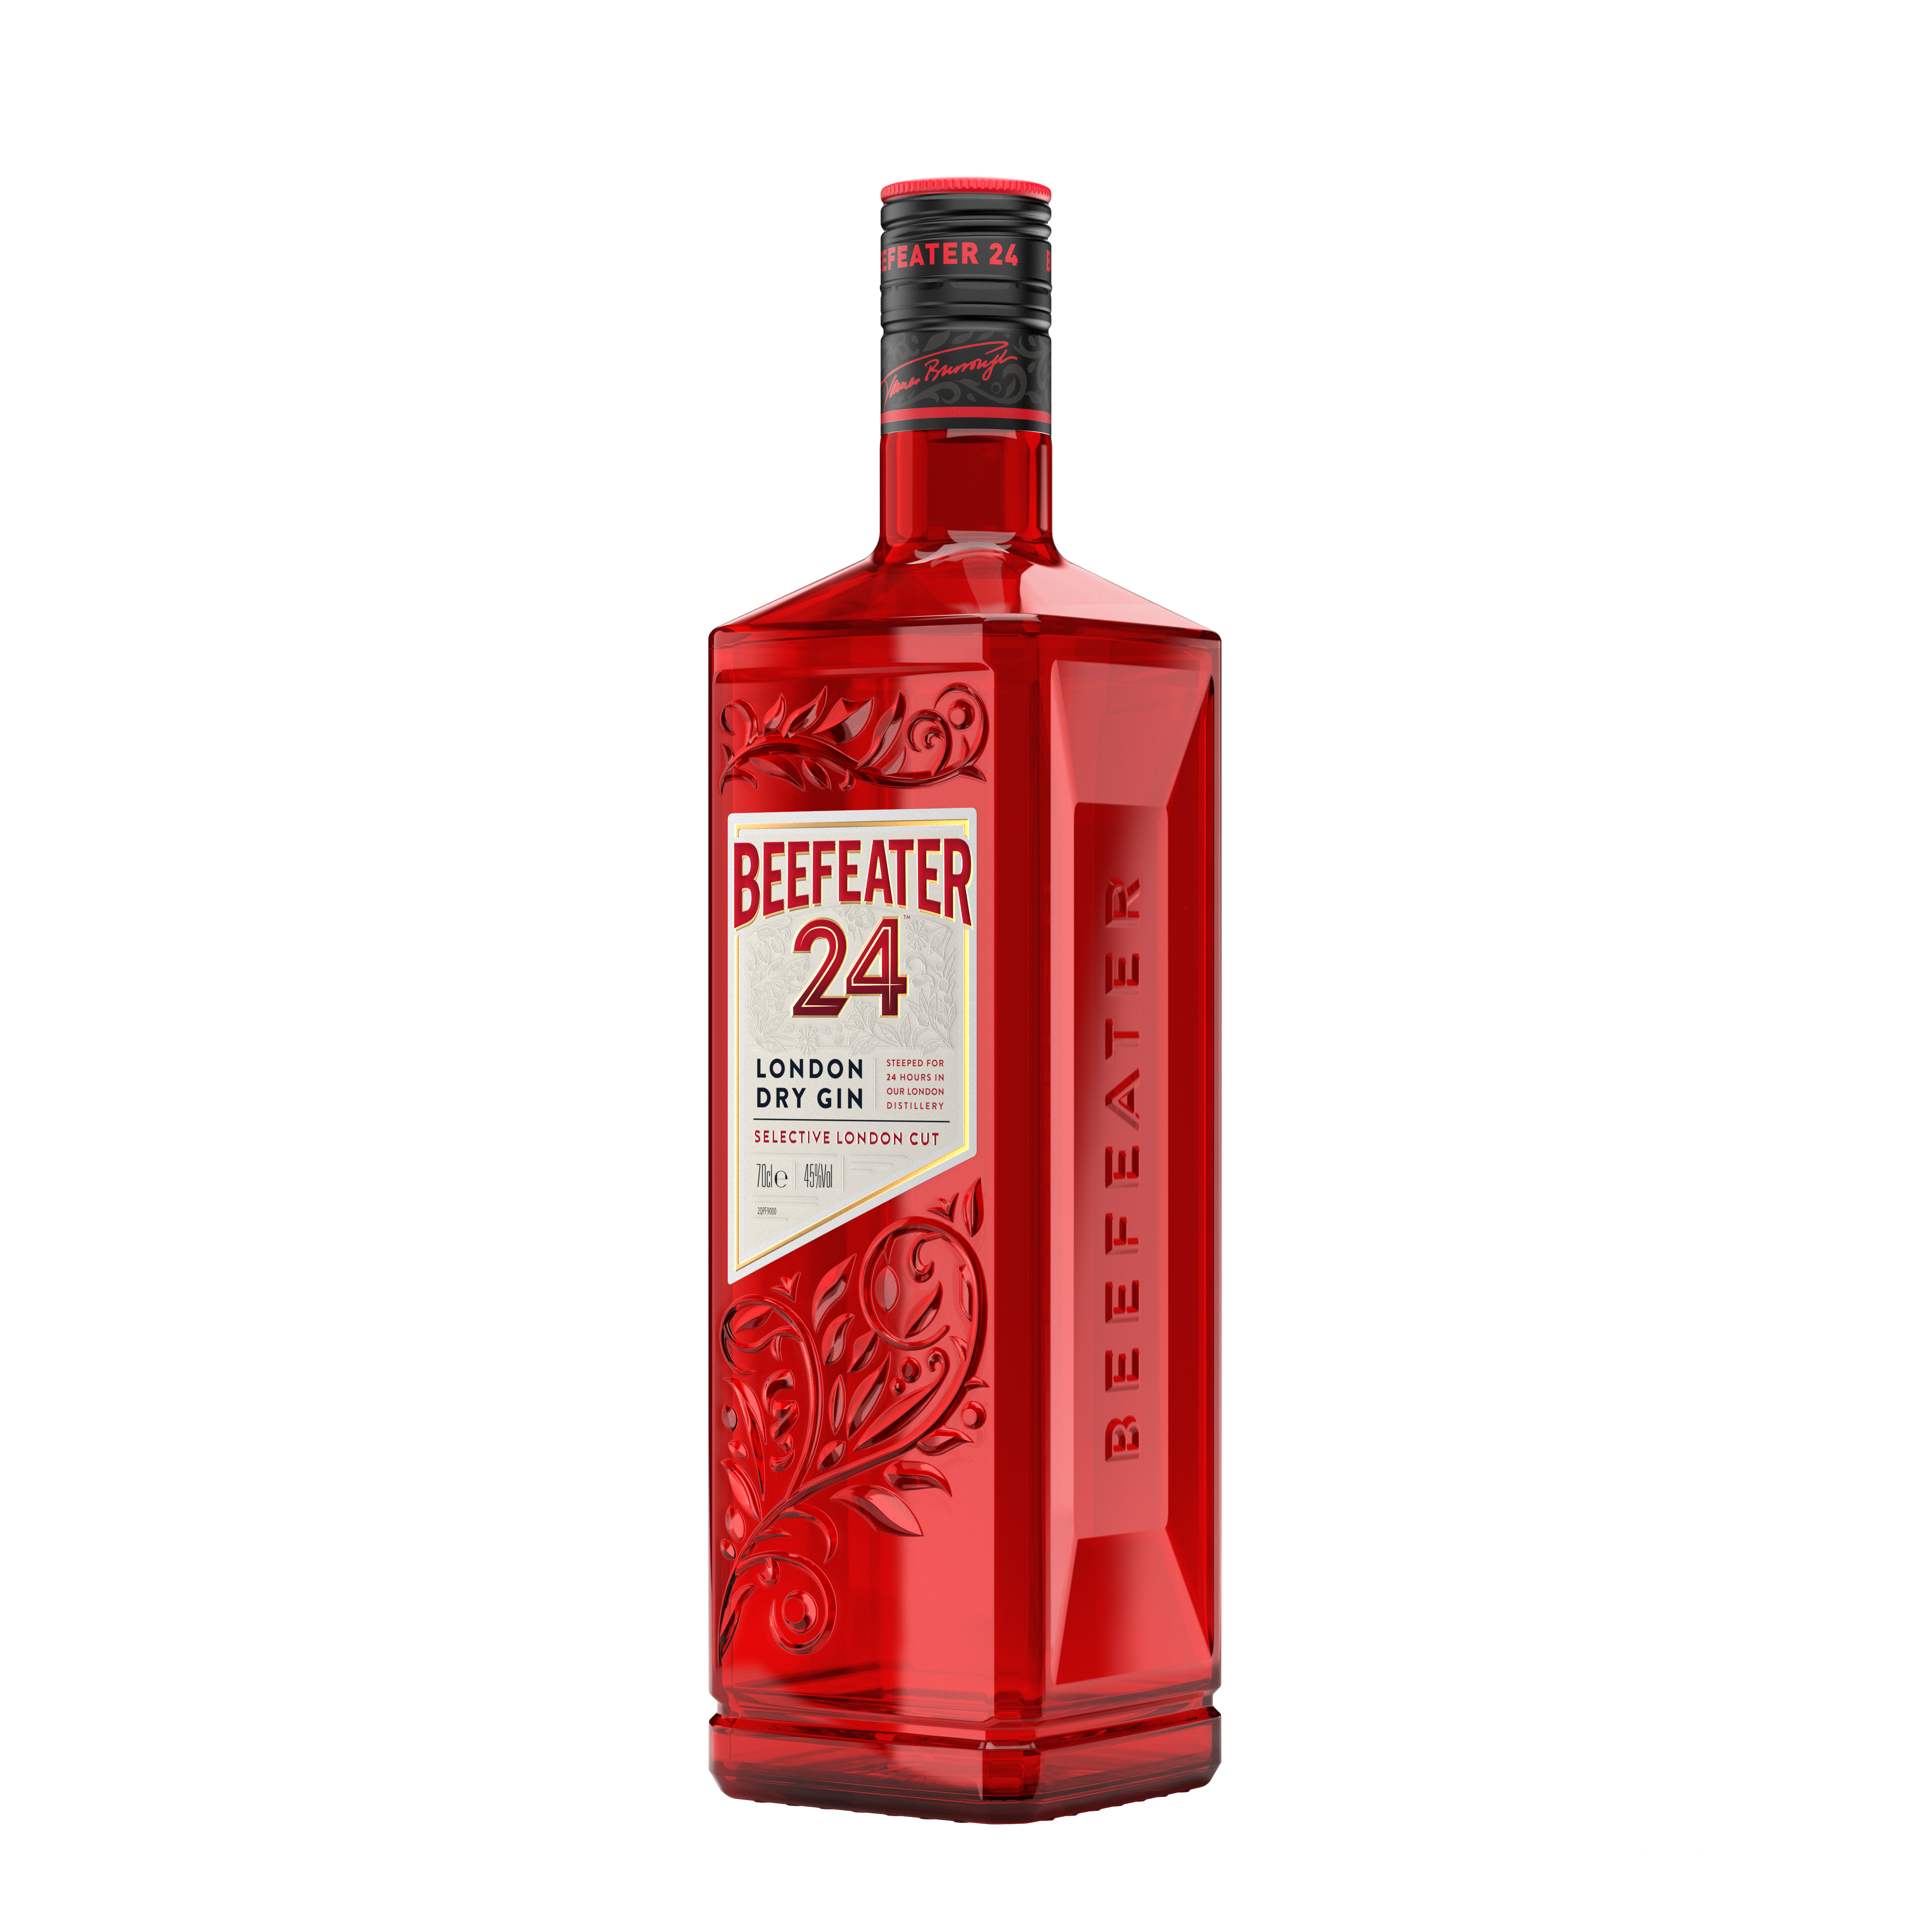 beefeater24 02 aspect ratio 735 732